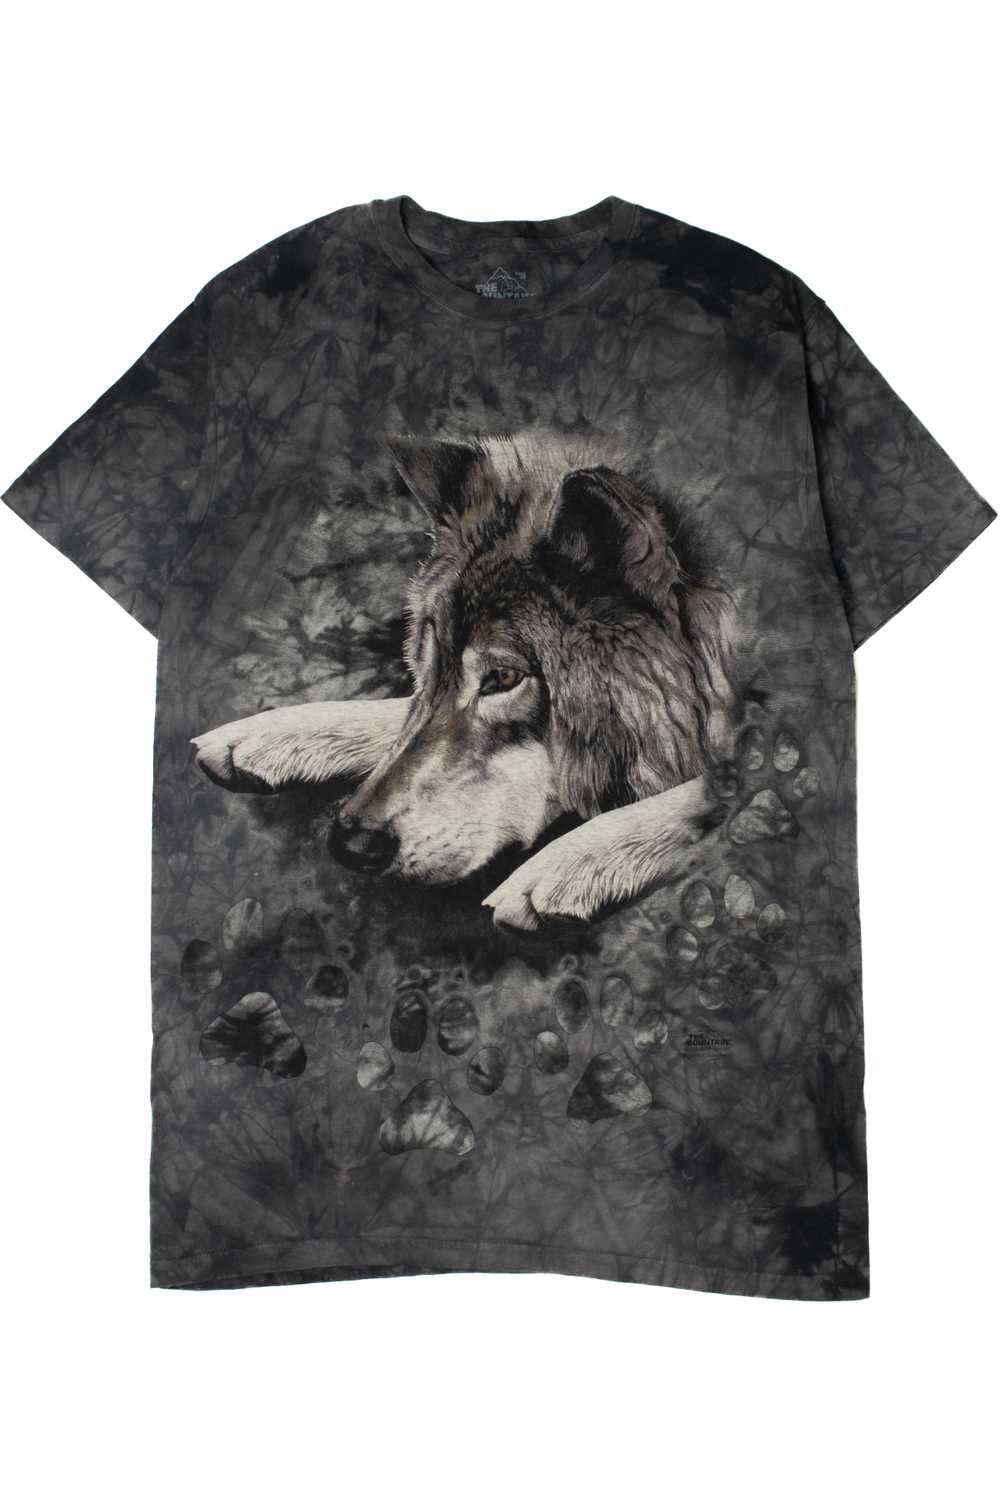 Vintage 2002 The Mountain Wolf Tie Dye T-Shirt - image 1